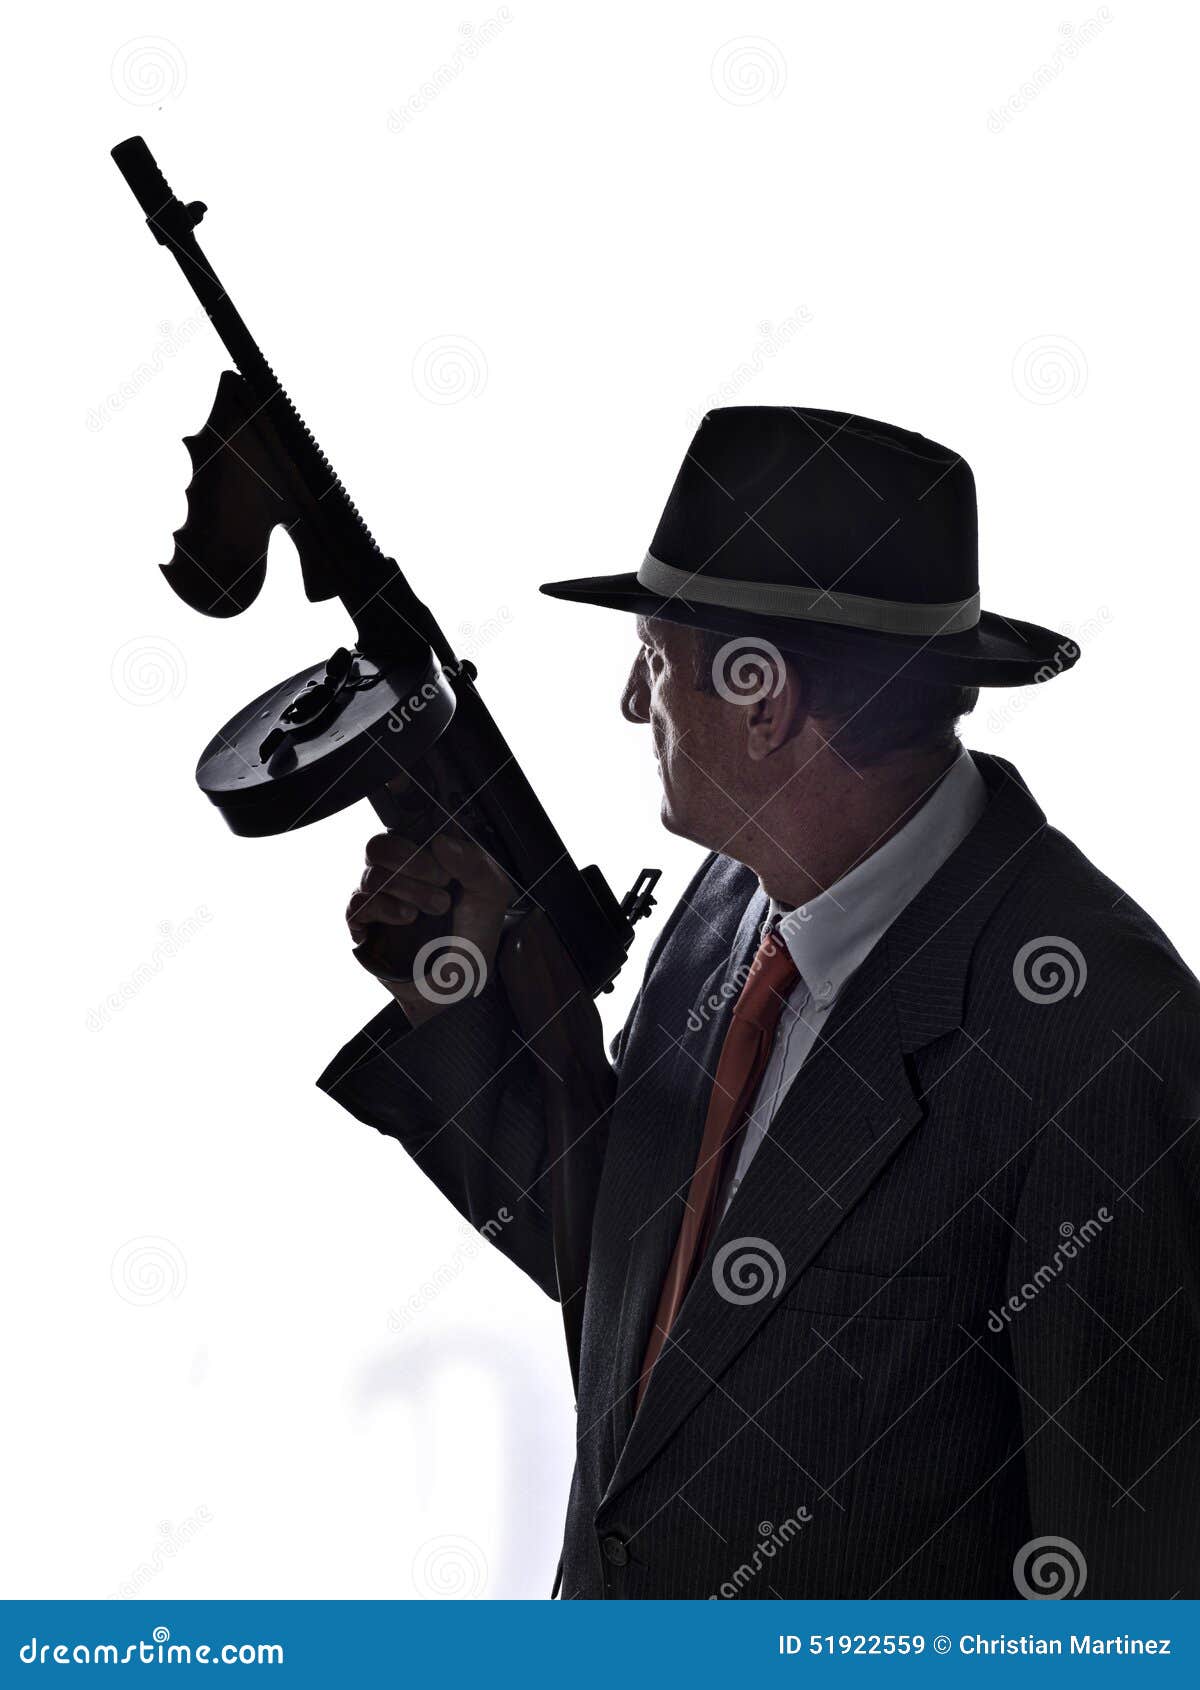 https://thumbs.dreamstime.com/z/gangster-old-style-tommy-gun-white-background-51922559.jpg